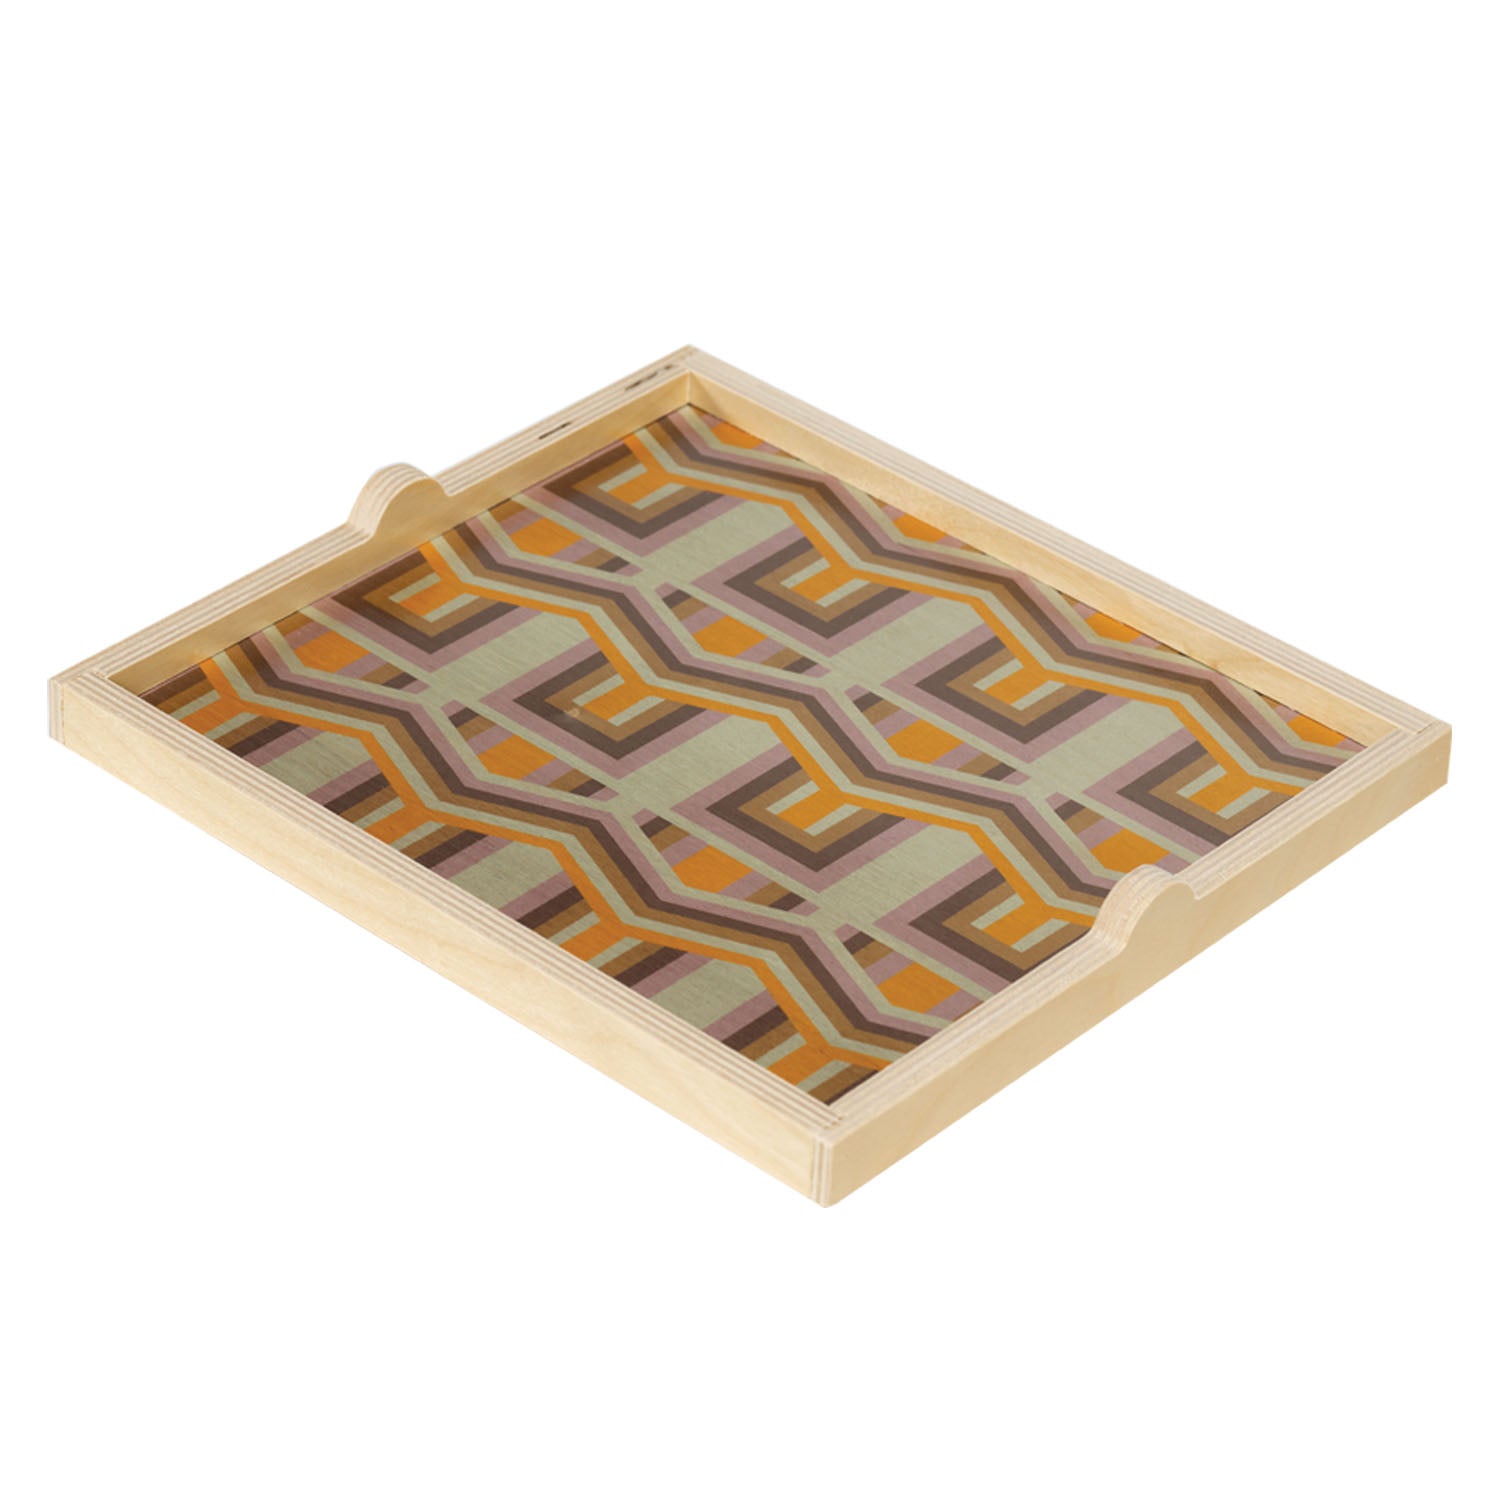 Shareen Lavender Square Tray